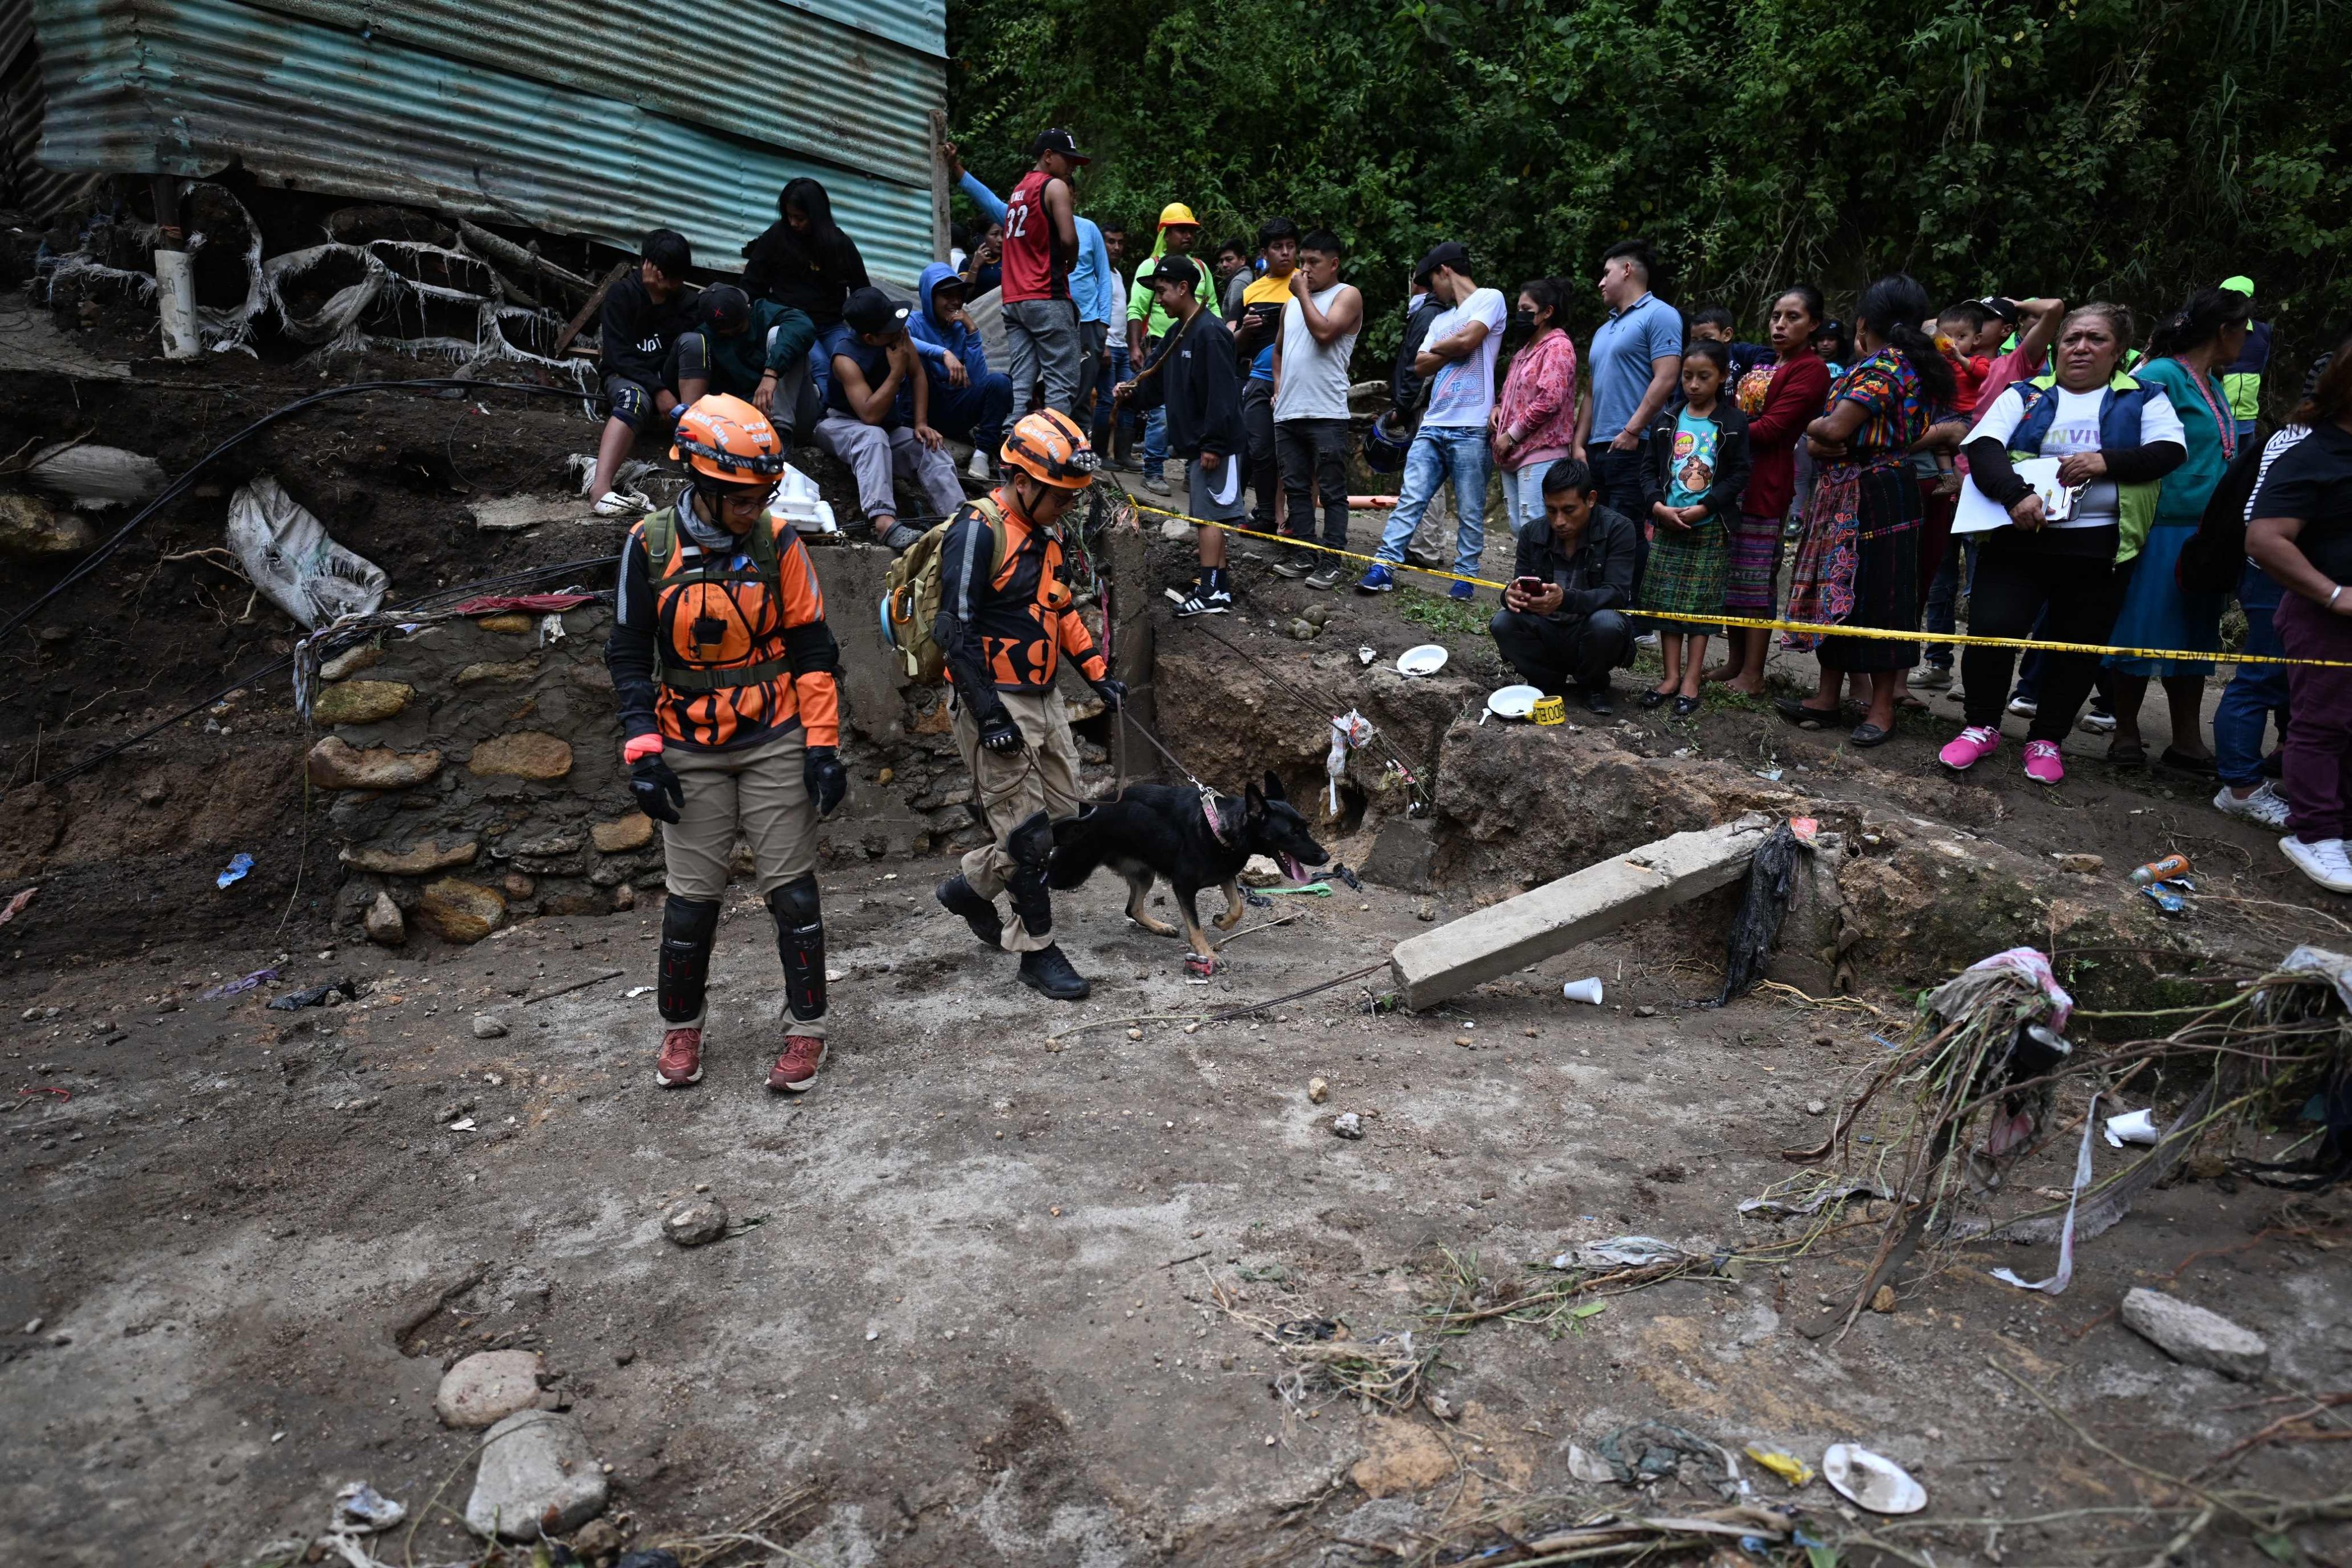 People watch as rescue teams work at the site where a sewage-polluted river swollen by heavy rains swept away precarious homes at Dios es Fiel shantytown, in the Kjell Laugerud colony in Guatemla City on Monday. Photo: AFP